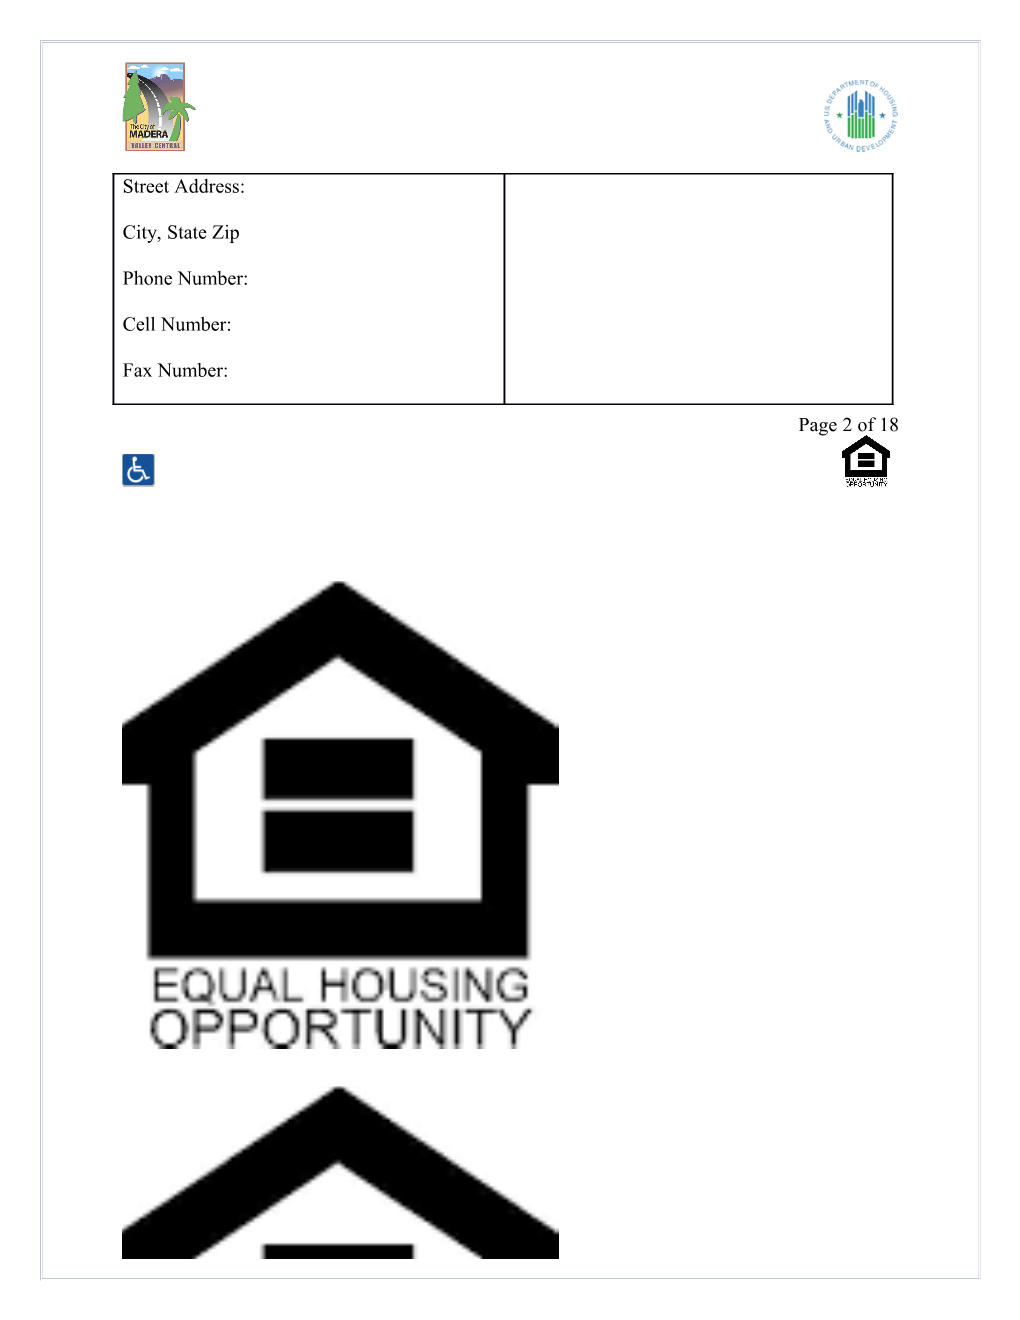 Fair Housing Education/Training and Auditing Application